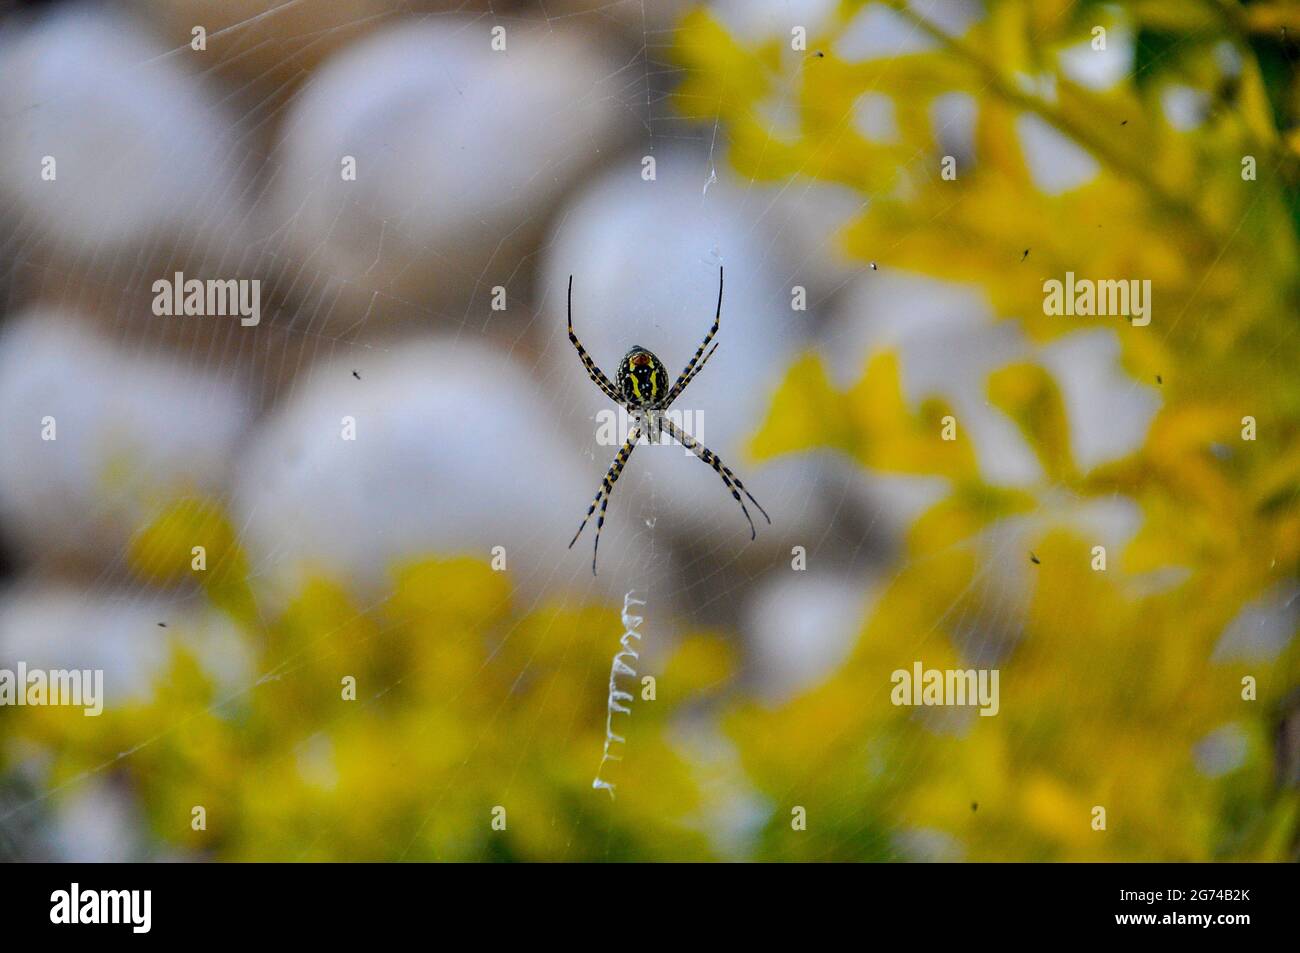 A closeup image of a Wasp spider with black and yellow stripes weaving a web on a background filled with yellow leaves Stock Photo